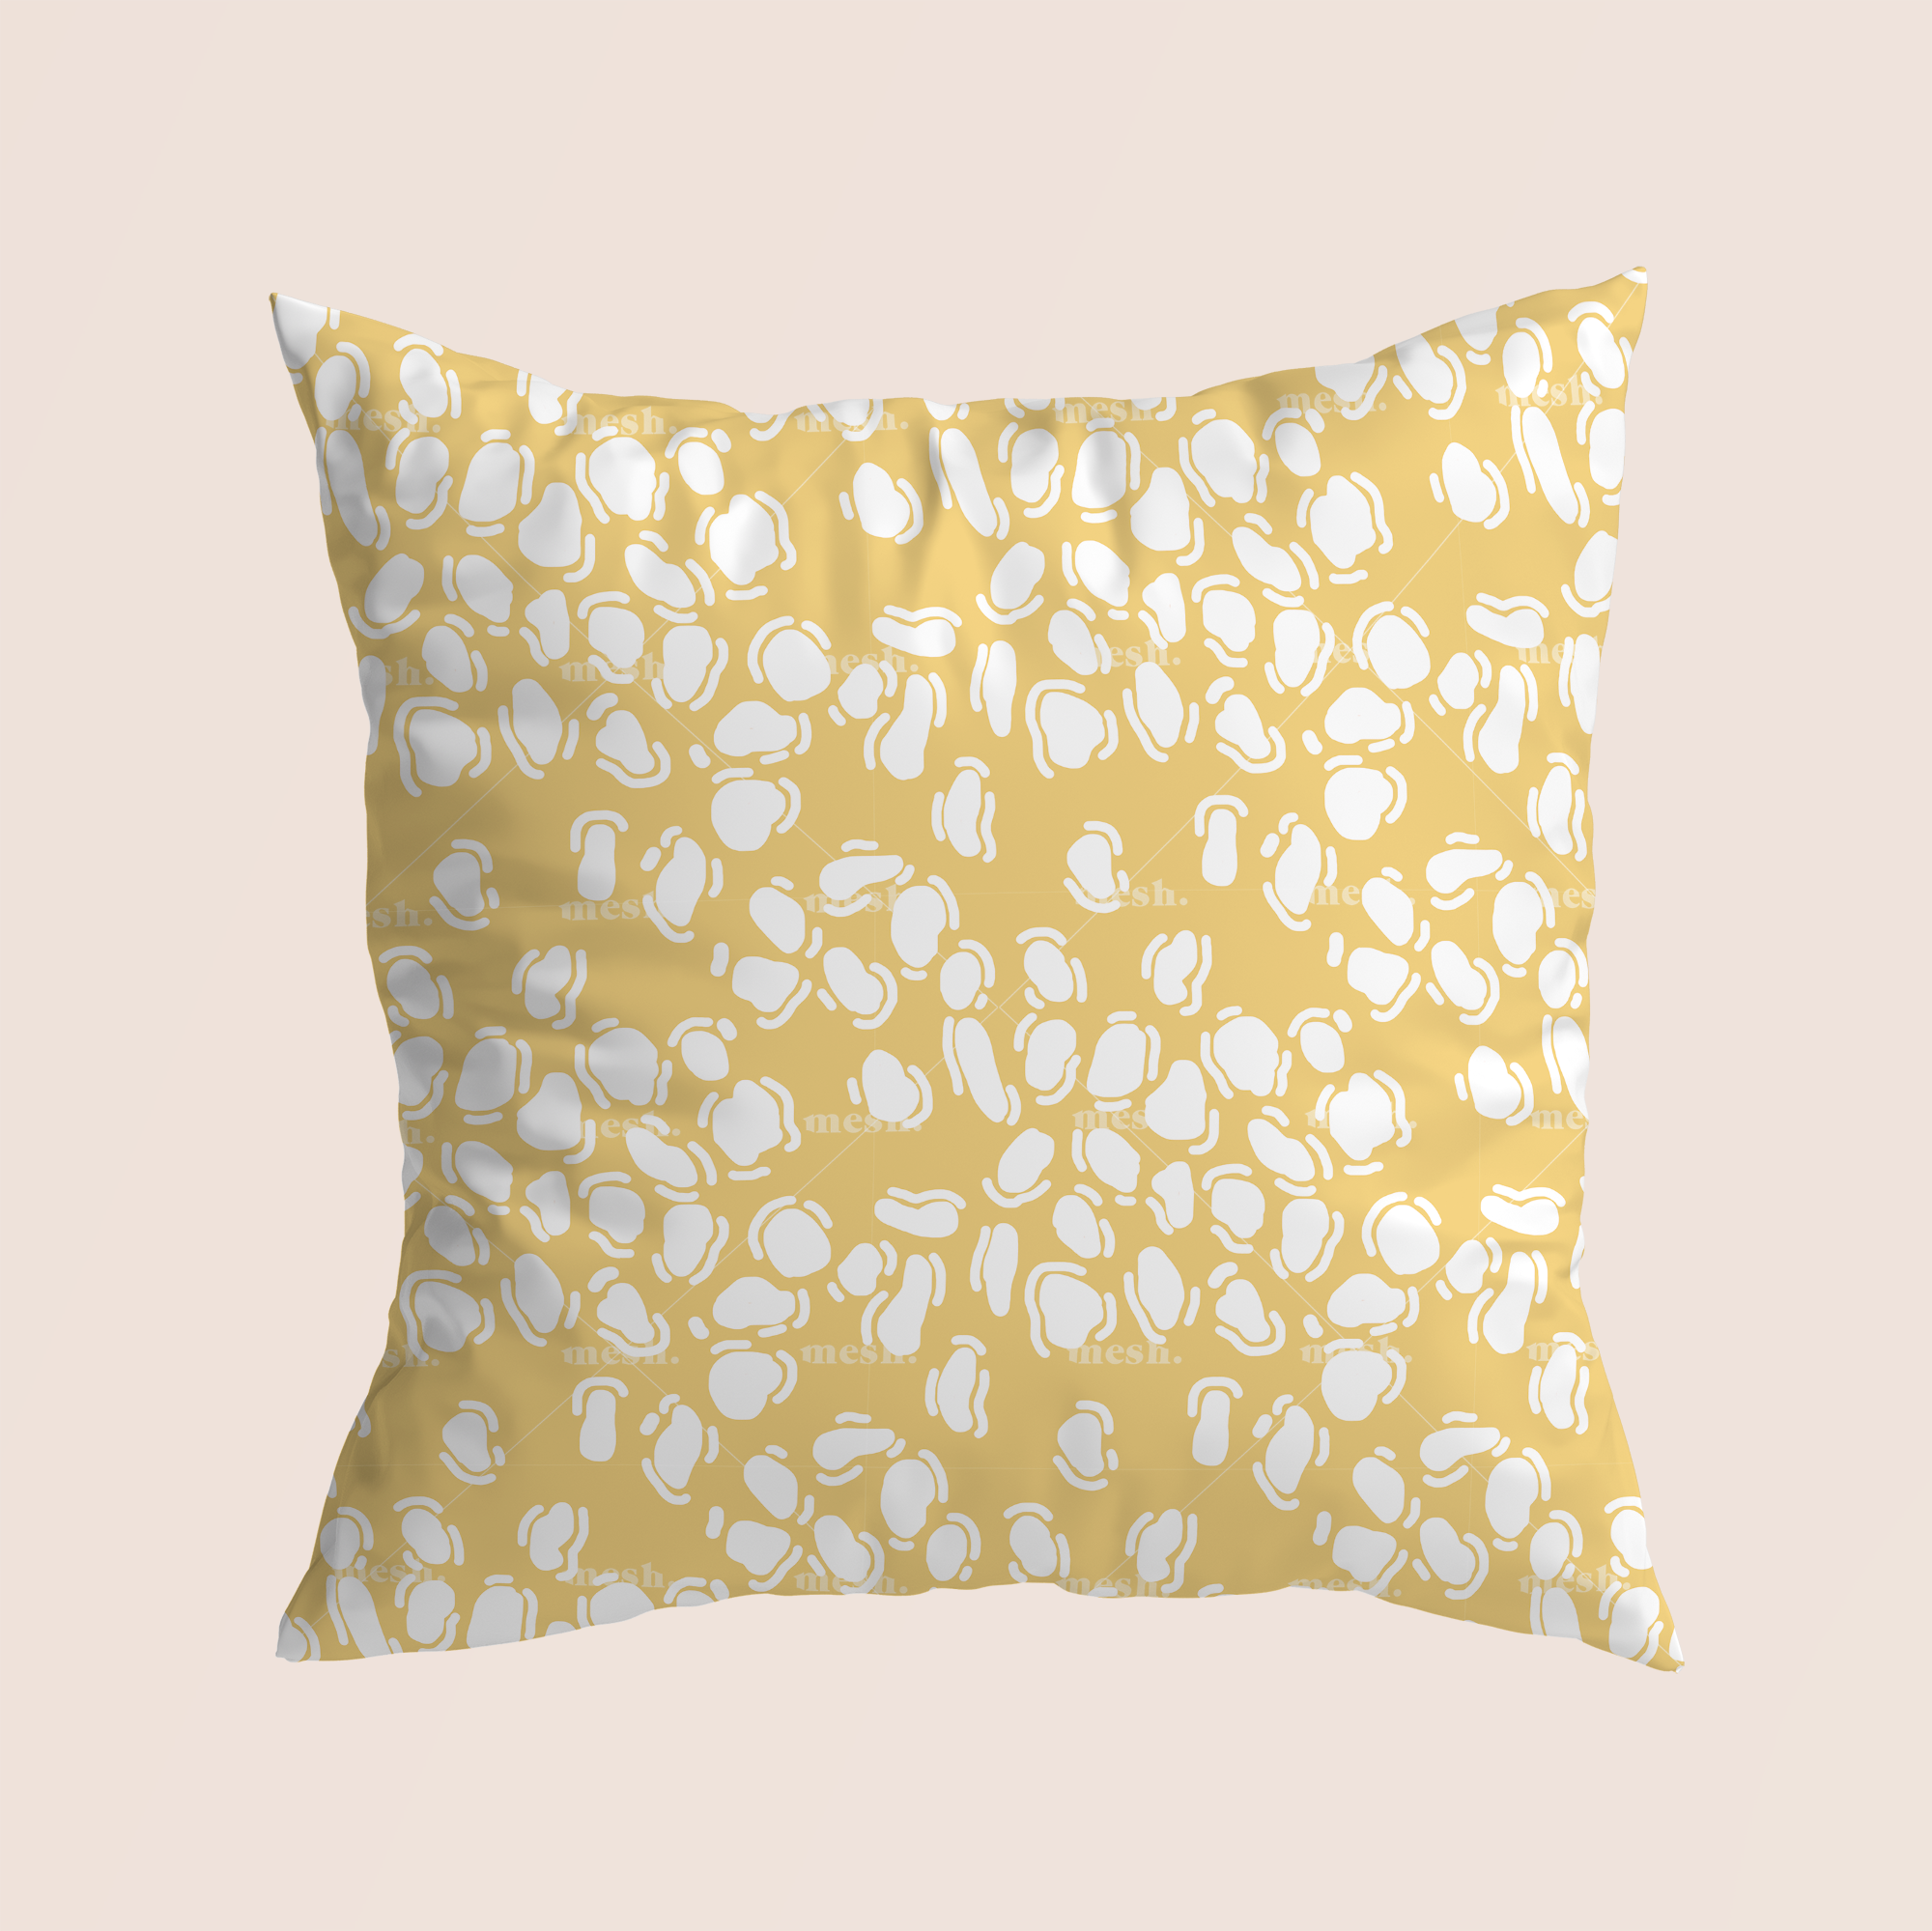 DNA map in yellow pattern design printed on recycled fabric home decor mockup